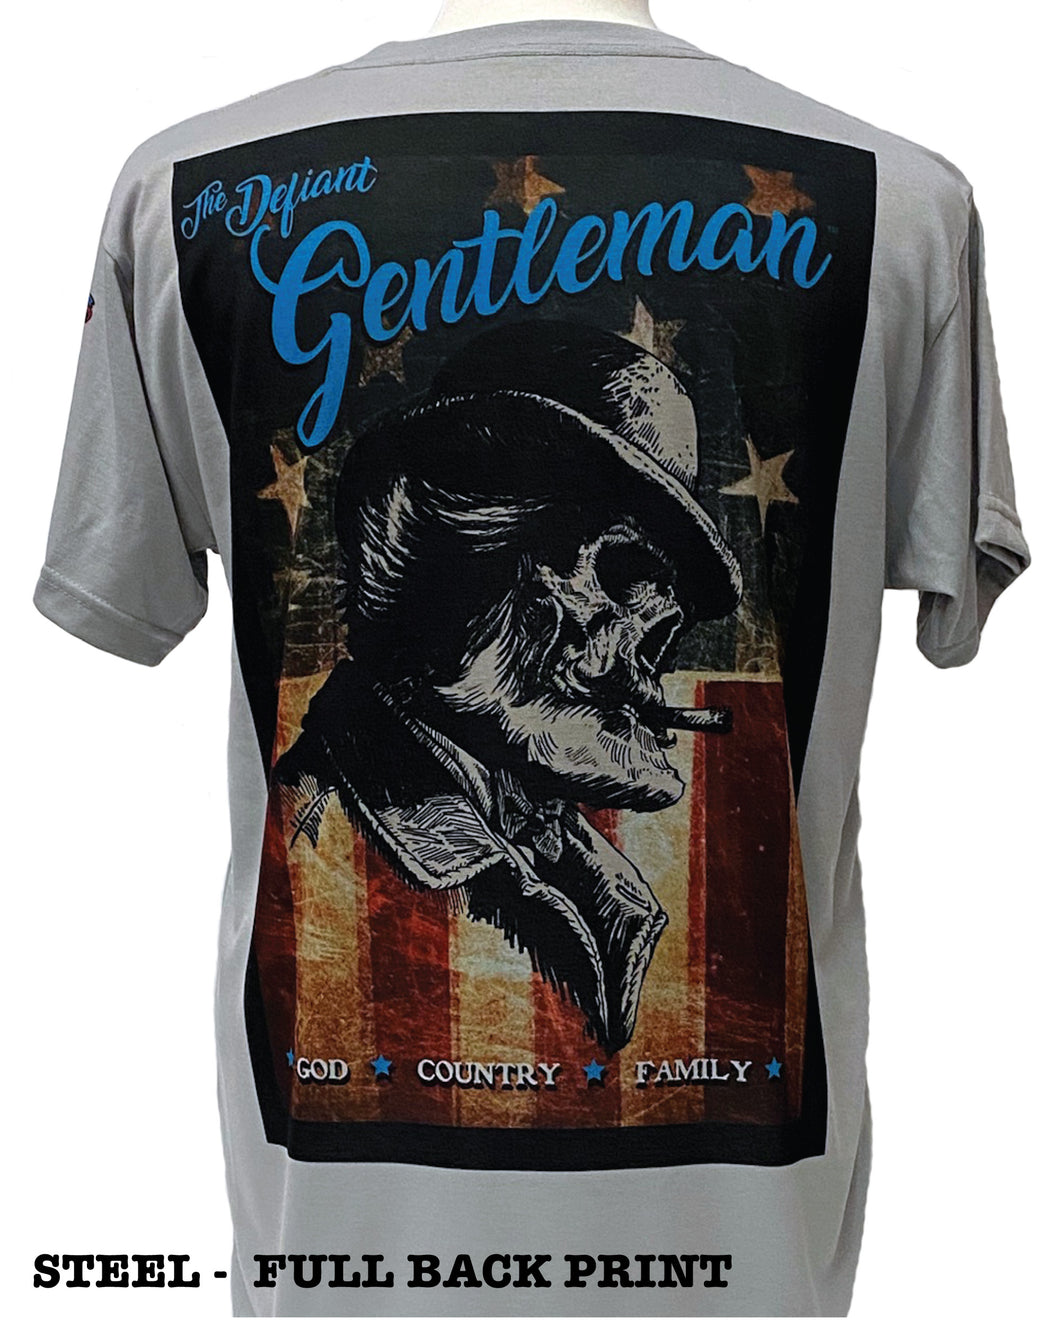 The Defiant Gentleman GOD FAMILY & COUNTRY Tee